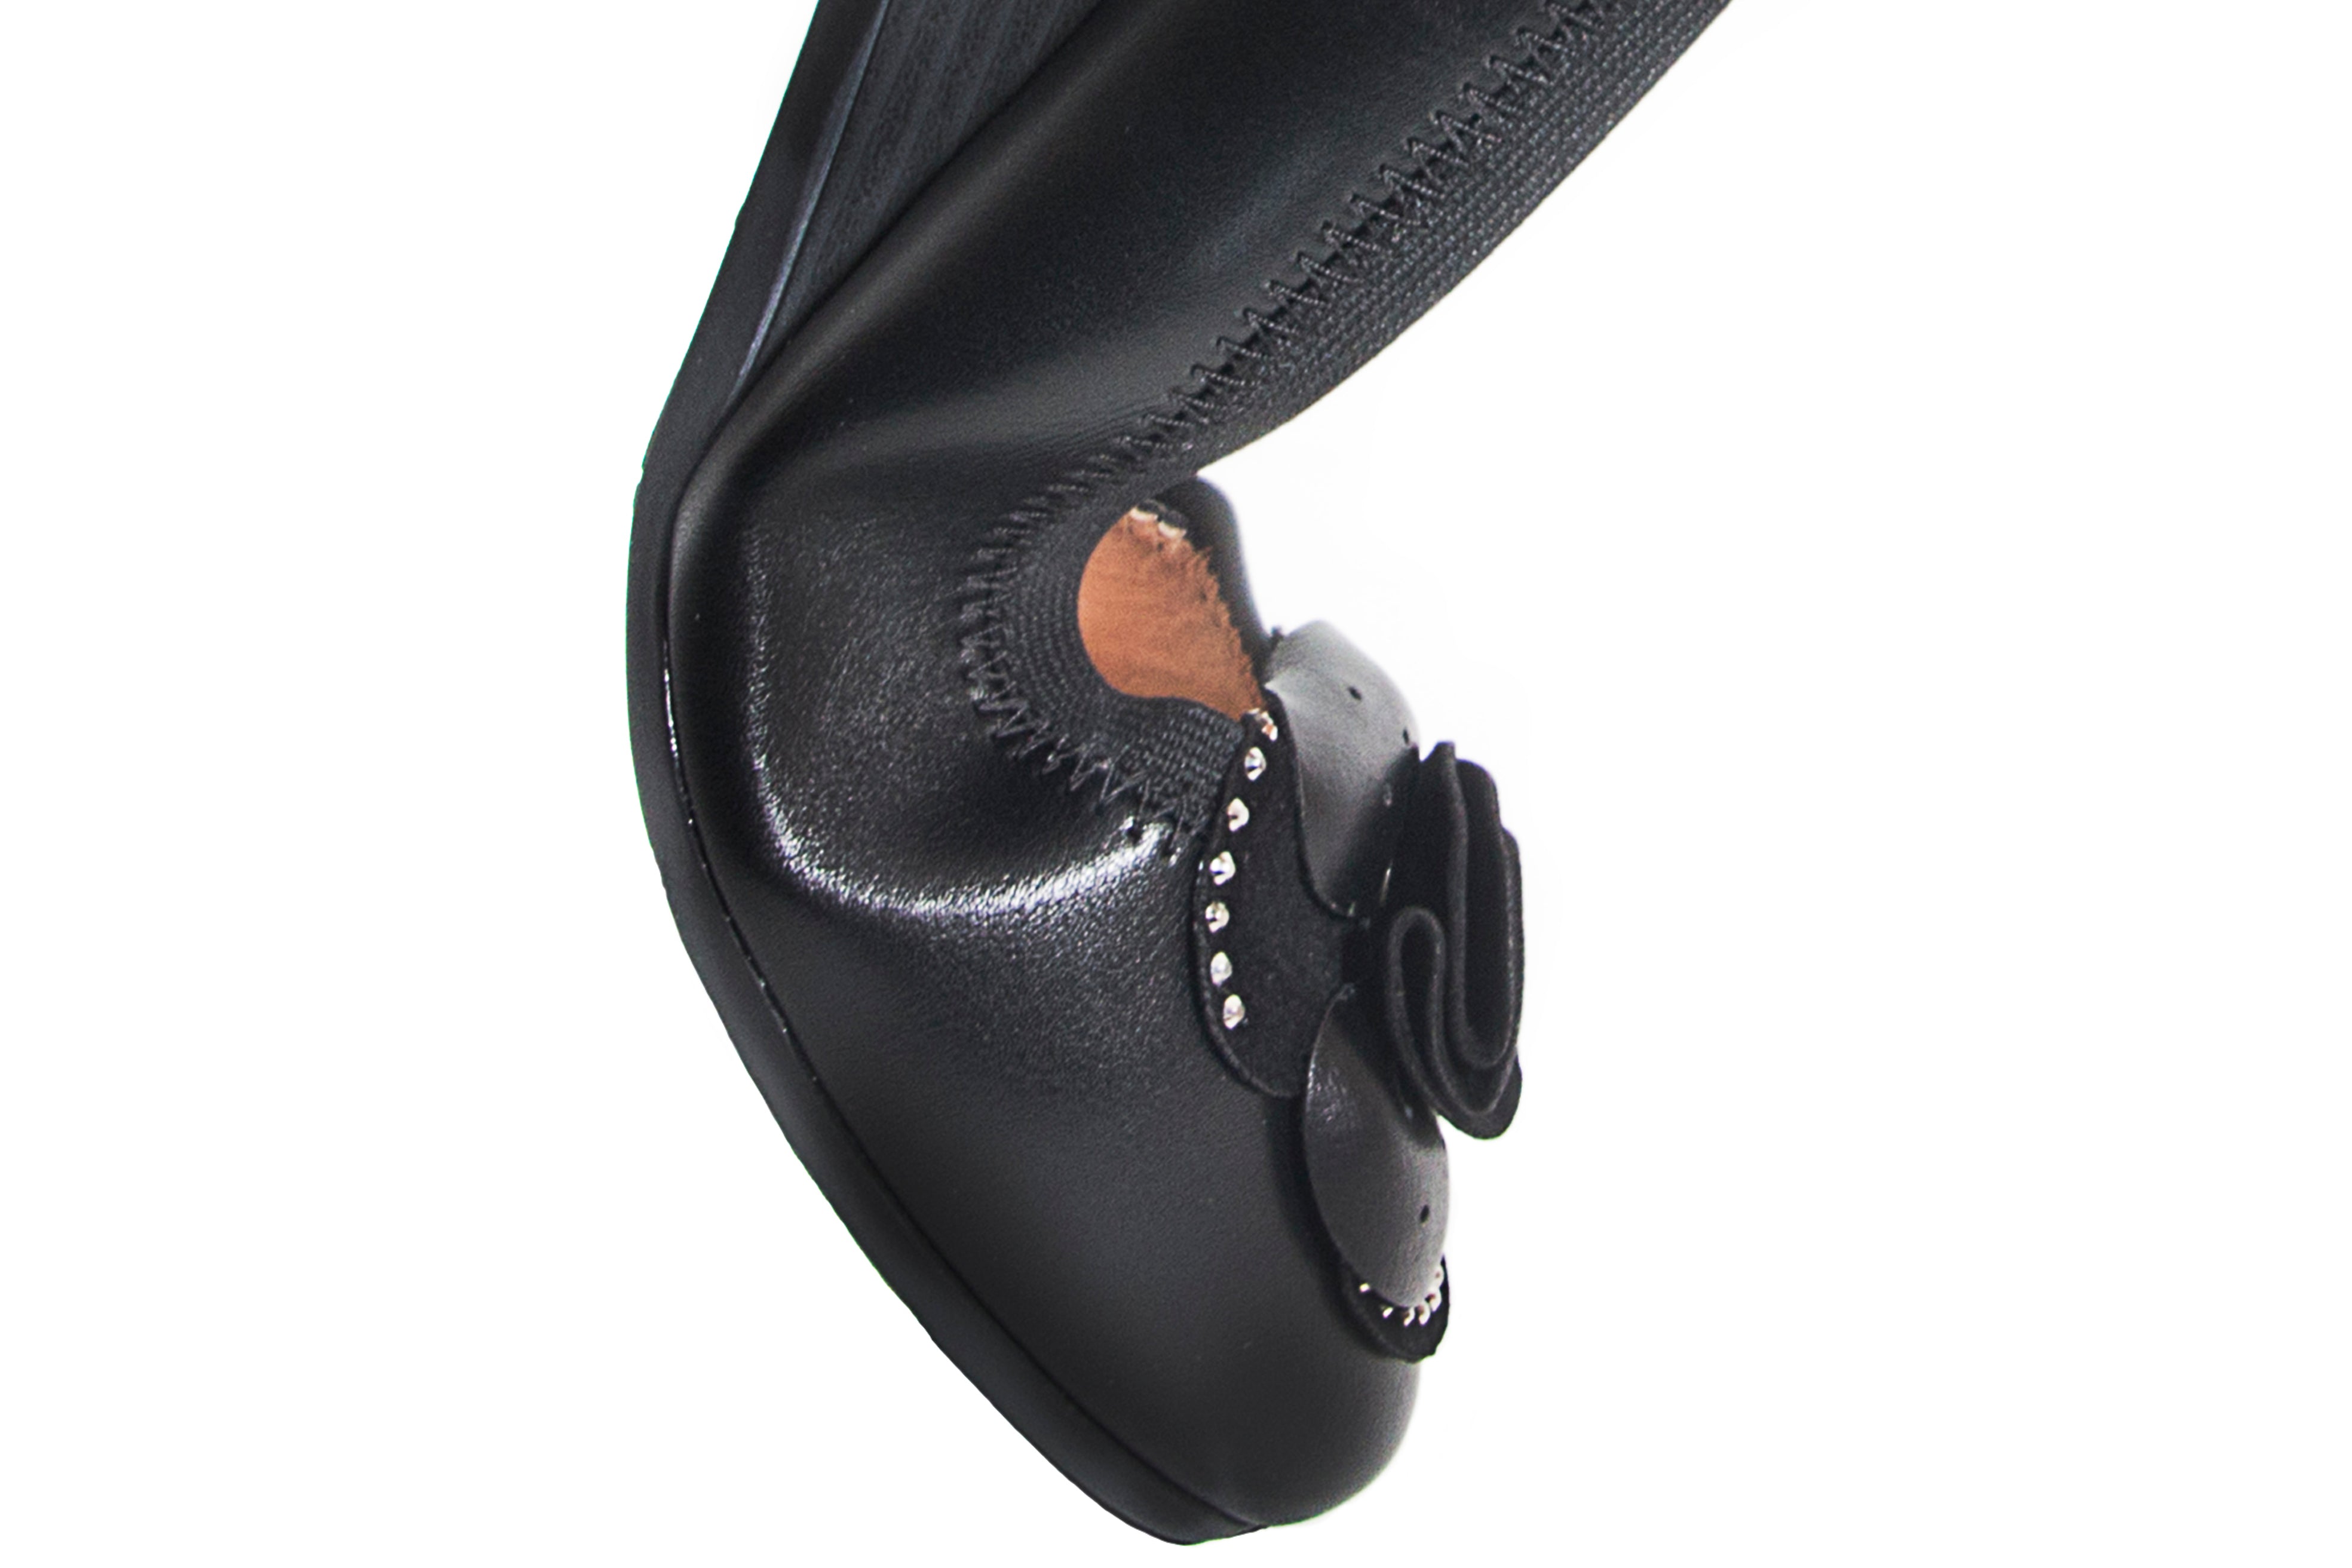 Soft and comfie leather Black color slip on wedge shoes with big sparkley flower center piece on the front